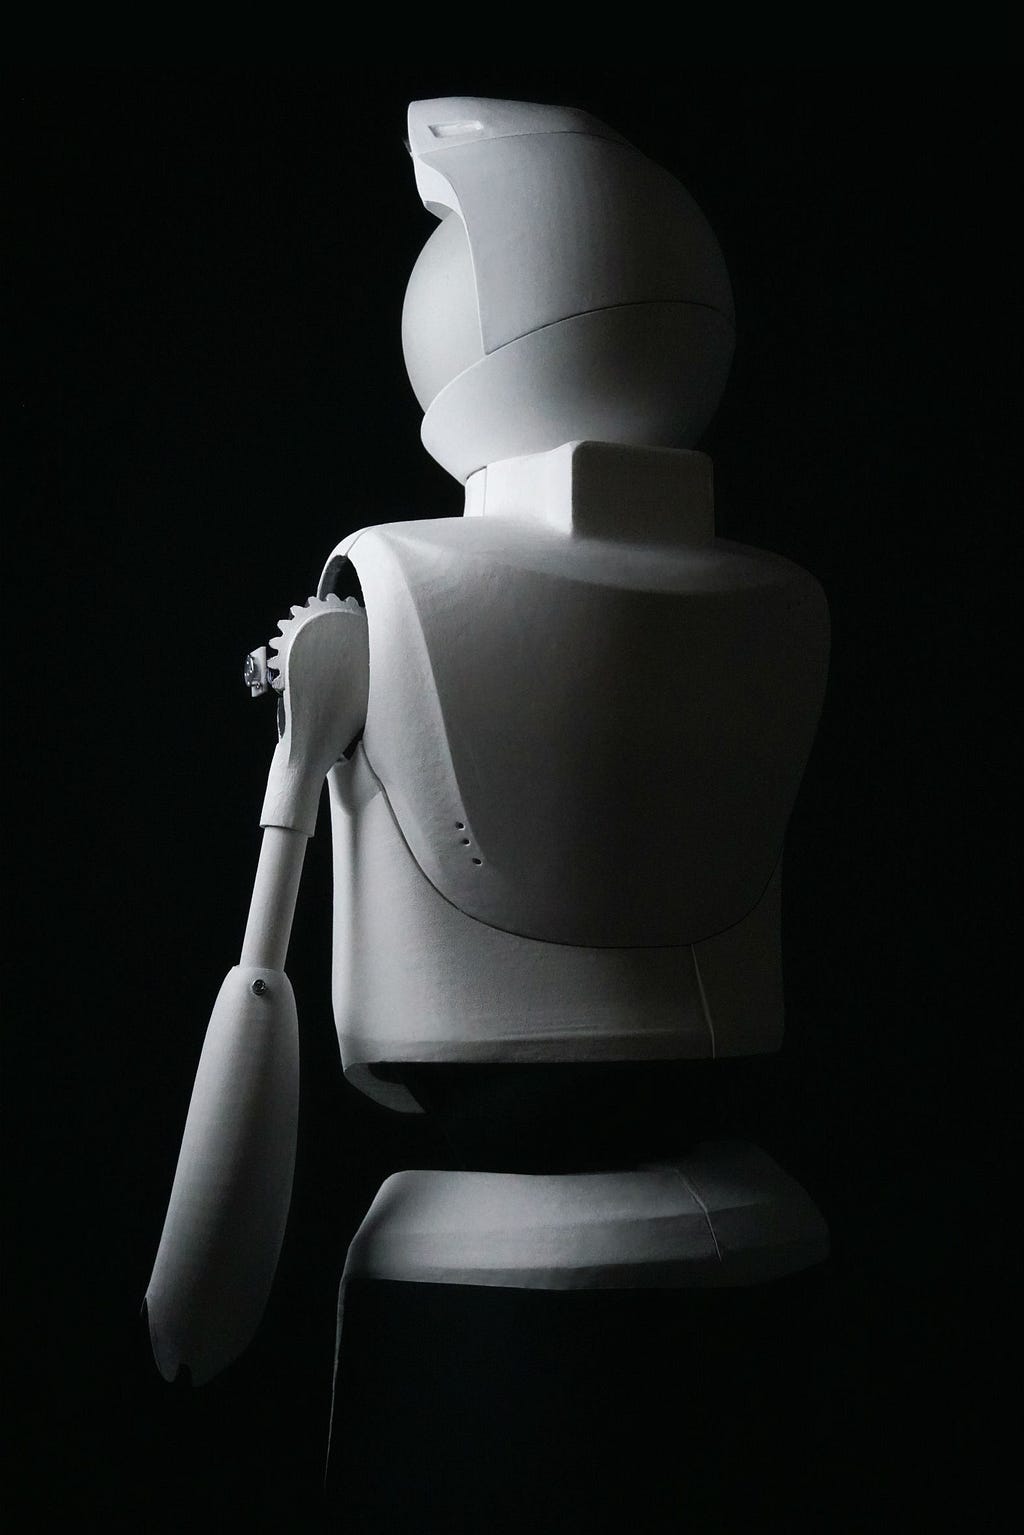 Dramatic black and white photo of Quori robot taken from behind. Shadow falls on robot’s back and looks ominous.